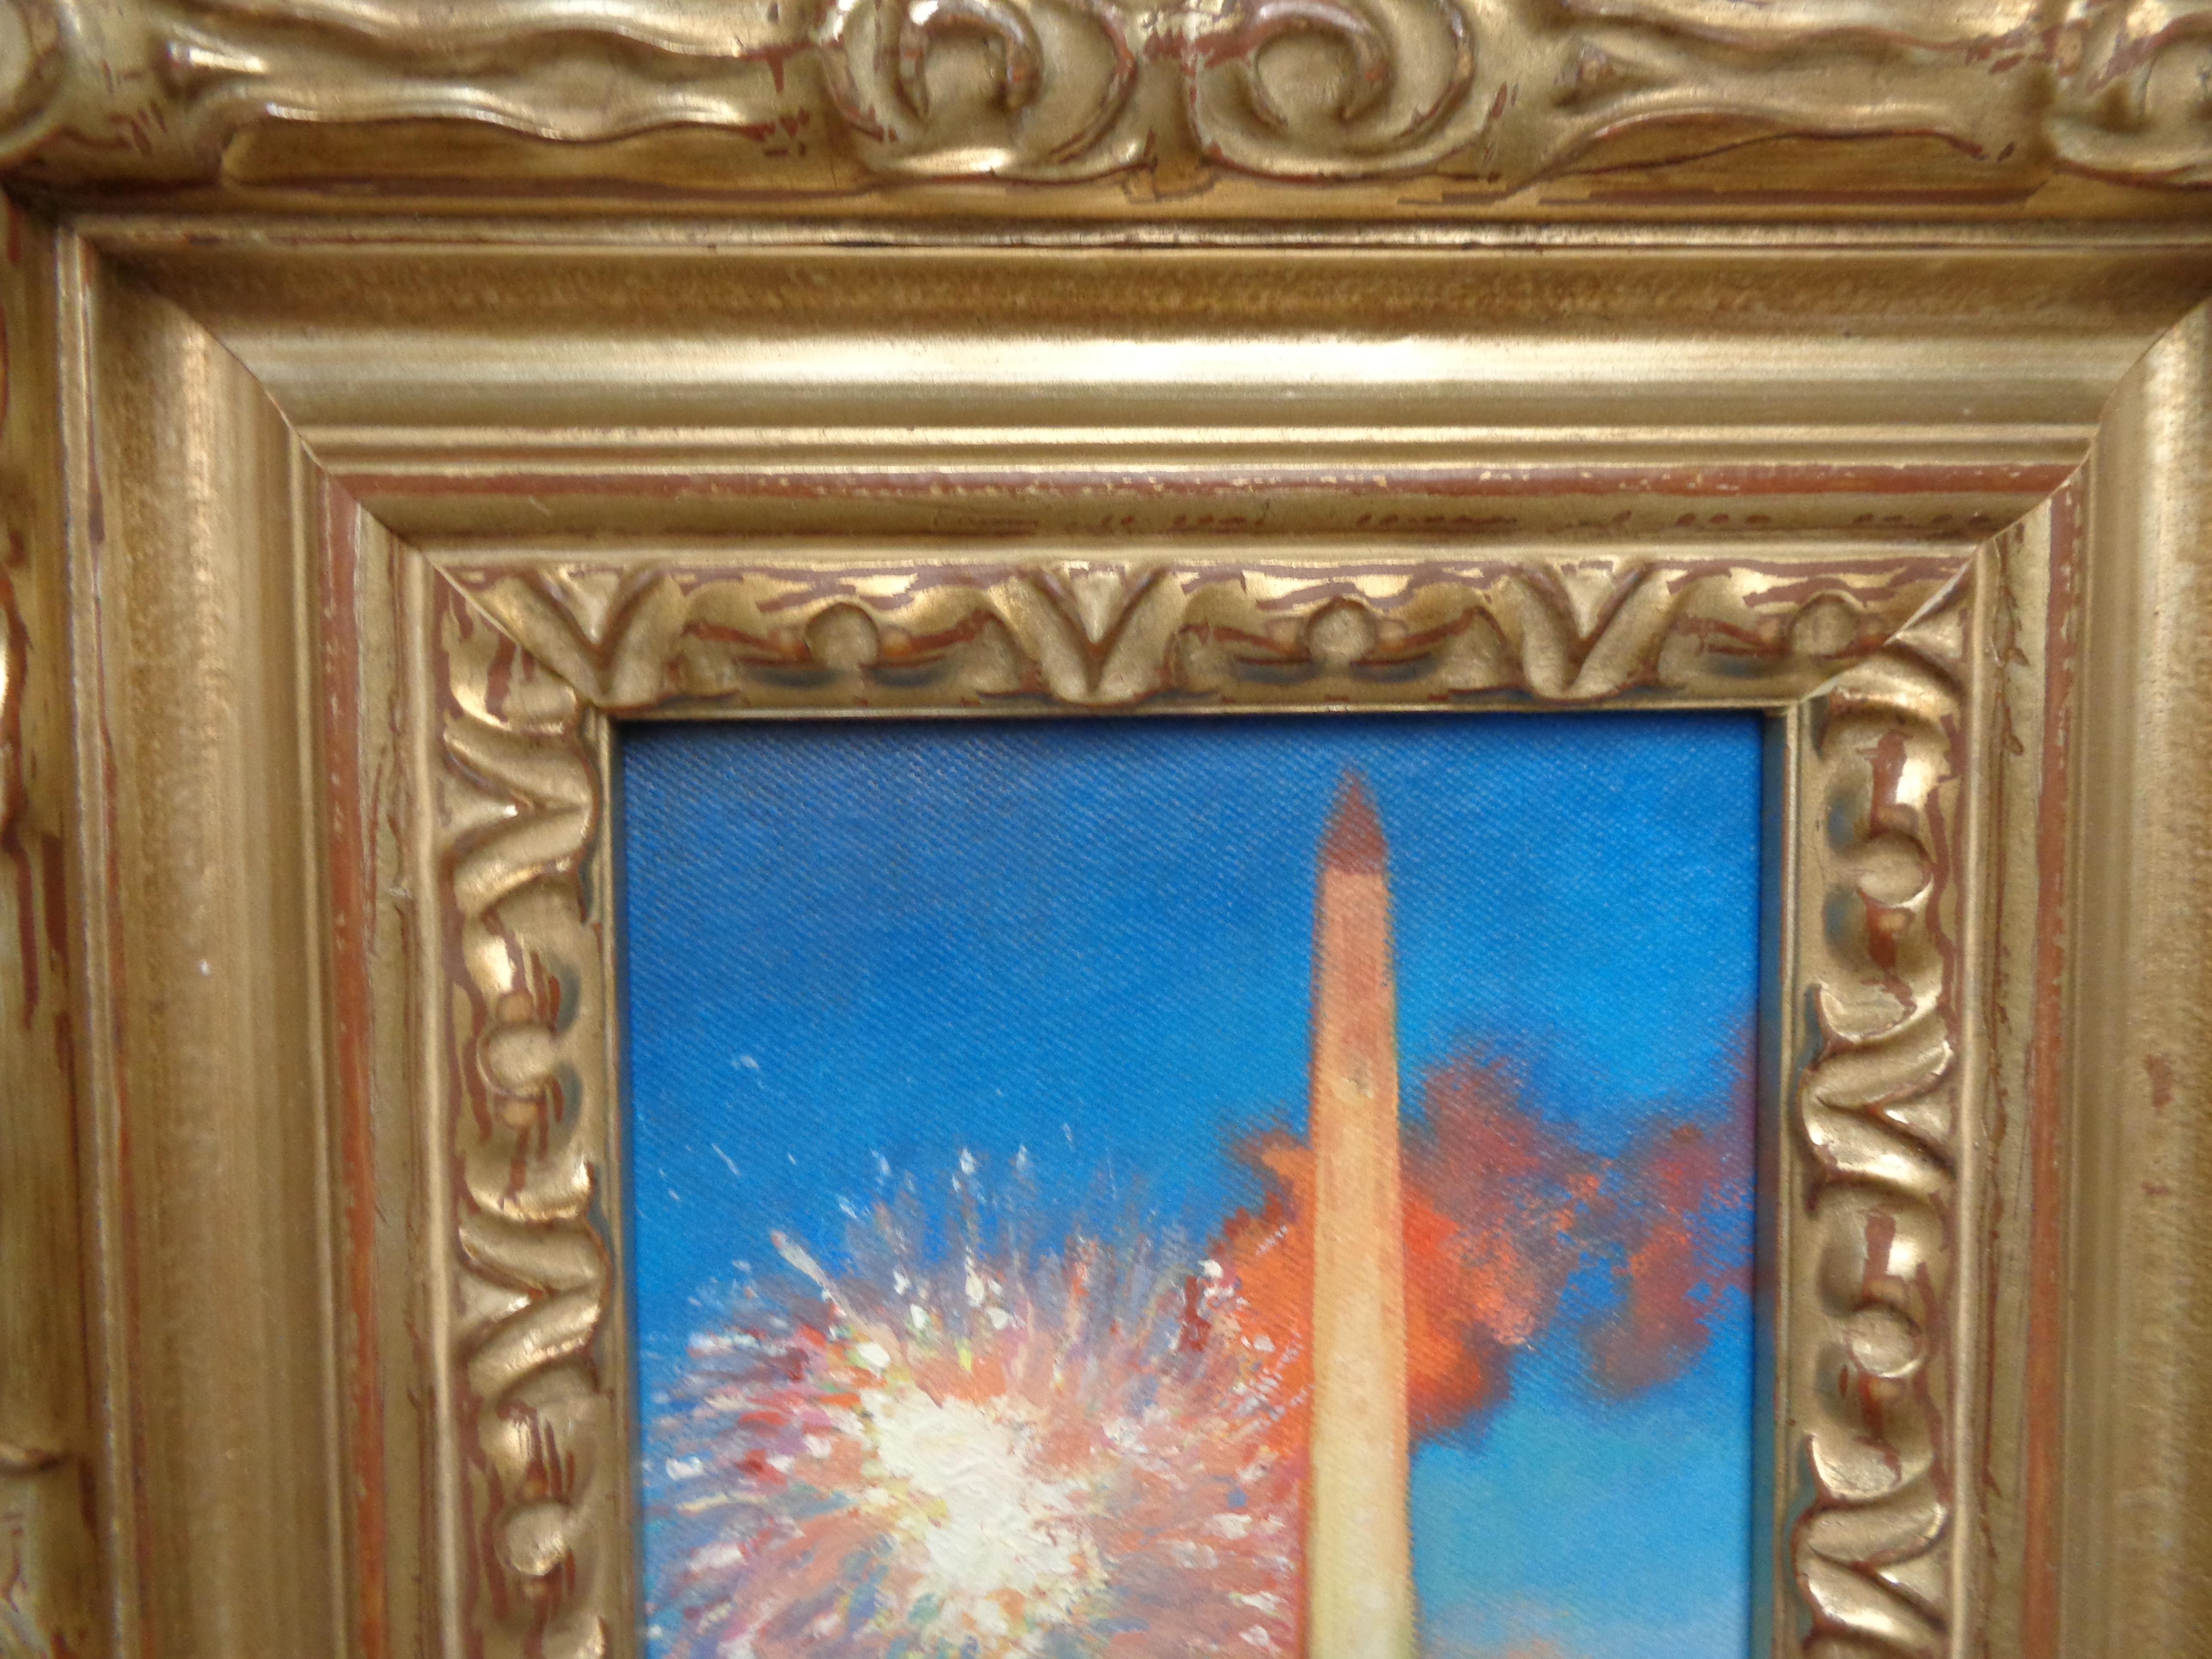 Spectacular Radiance,
4th of July, Washington Monument
oil/panel 6 x 8 image framed in a very showy frame. Frame can be changed.
Spectacular Radiance is an oil painting on canvas panel by award winning contemporary artist Michael Budden that